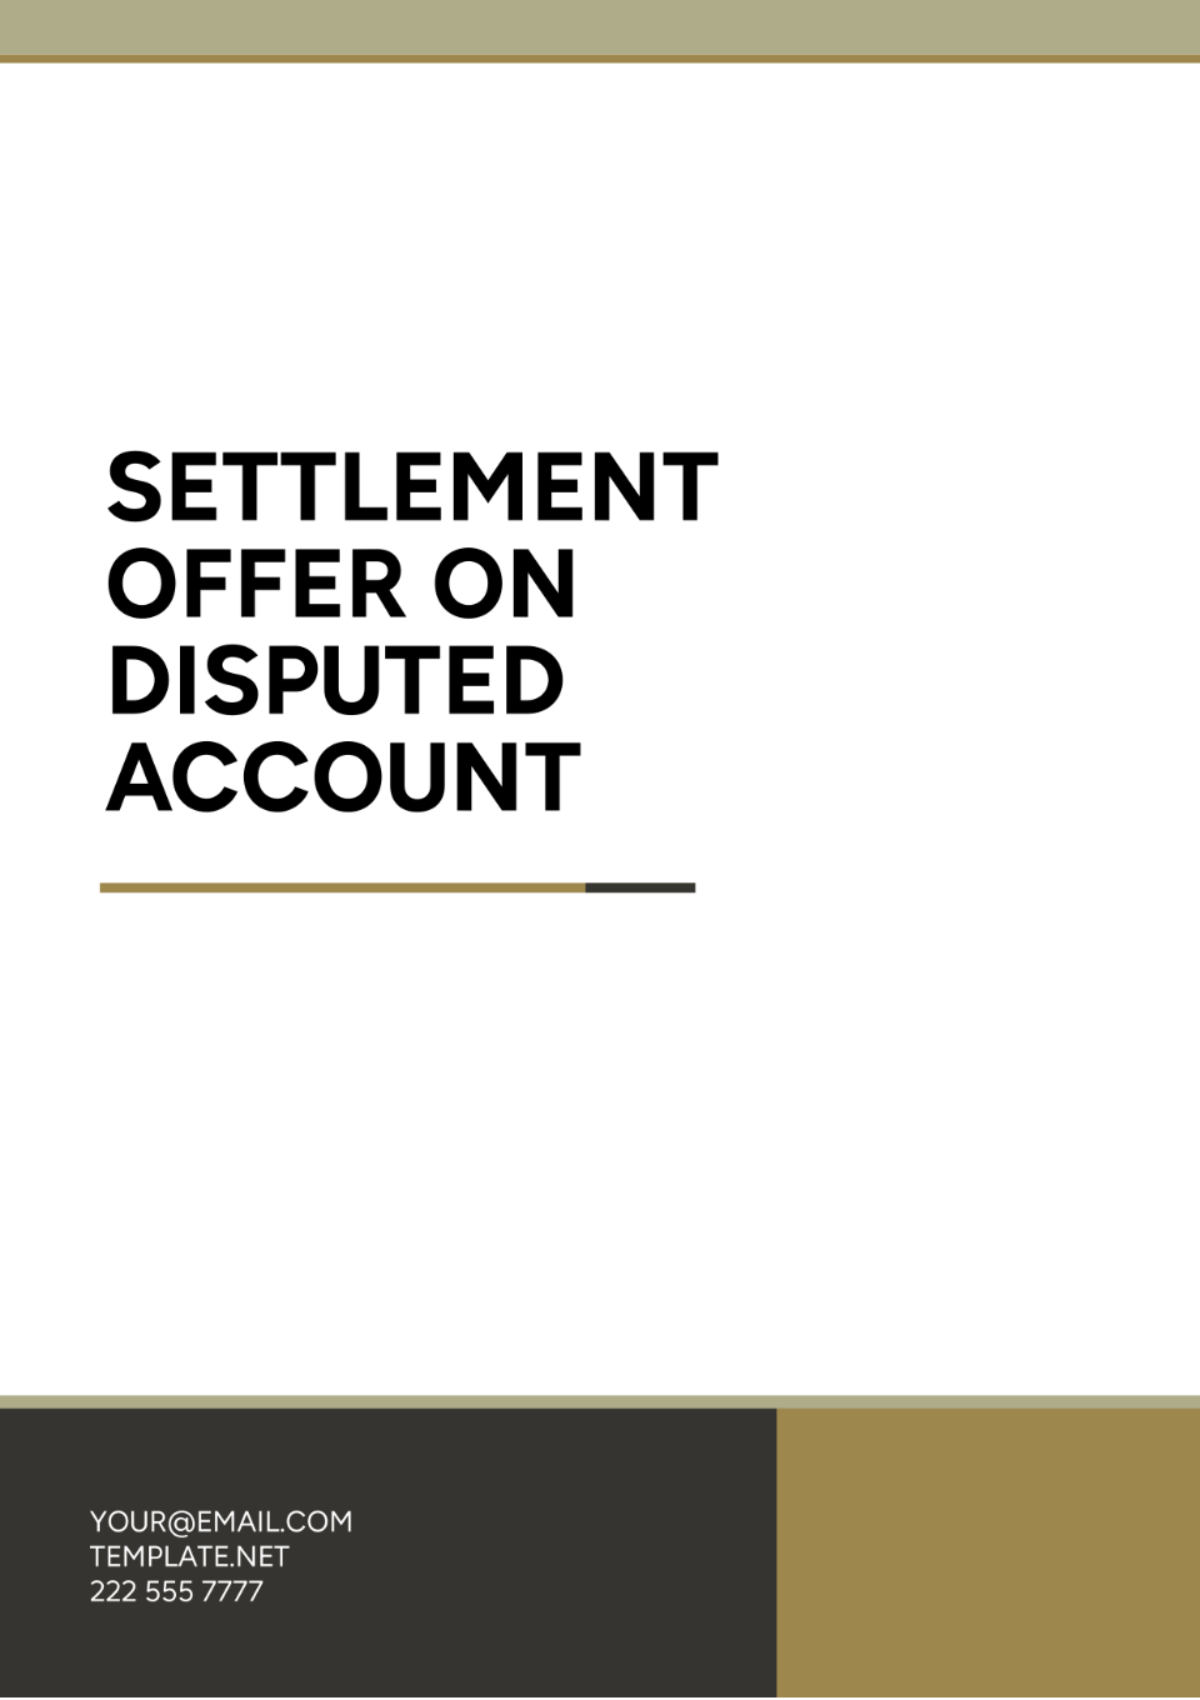 Free Settlement Offer on Disputed Account Template